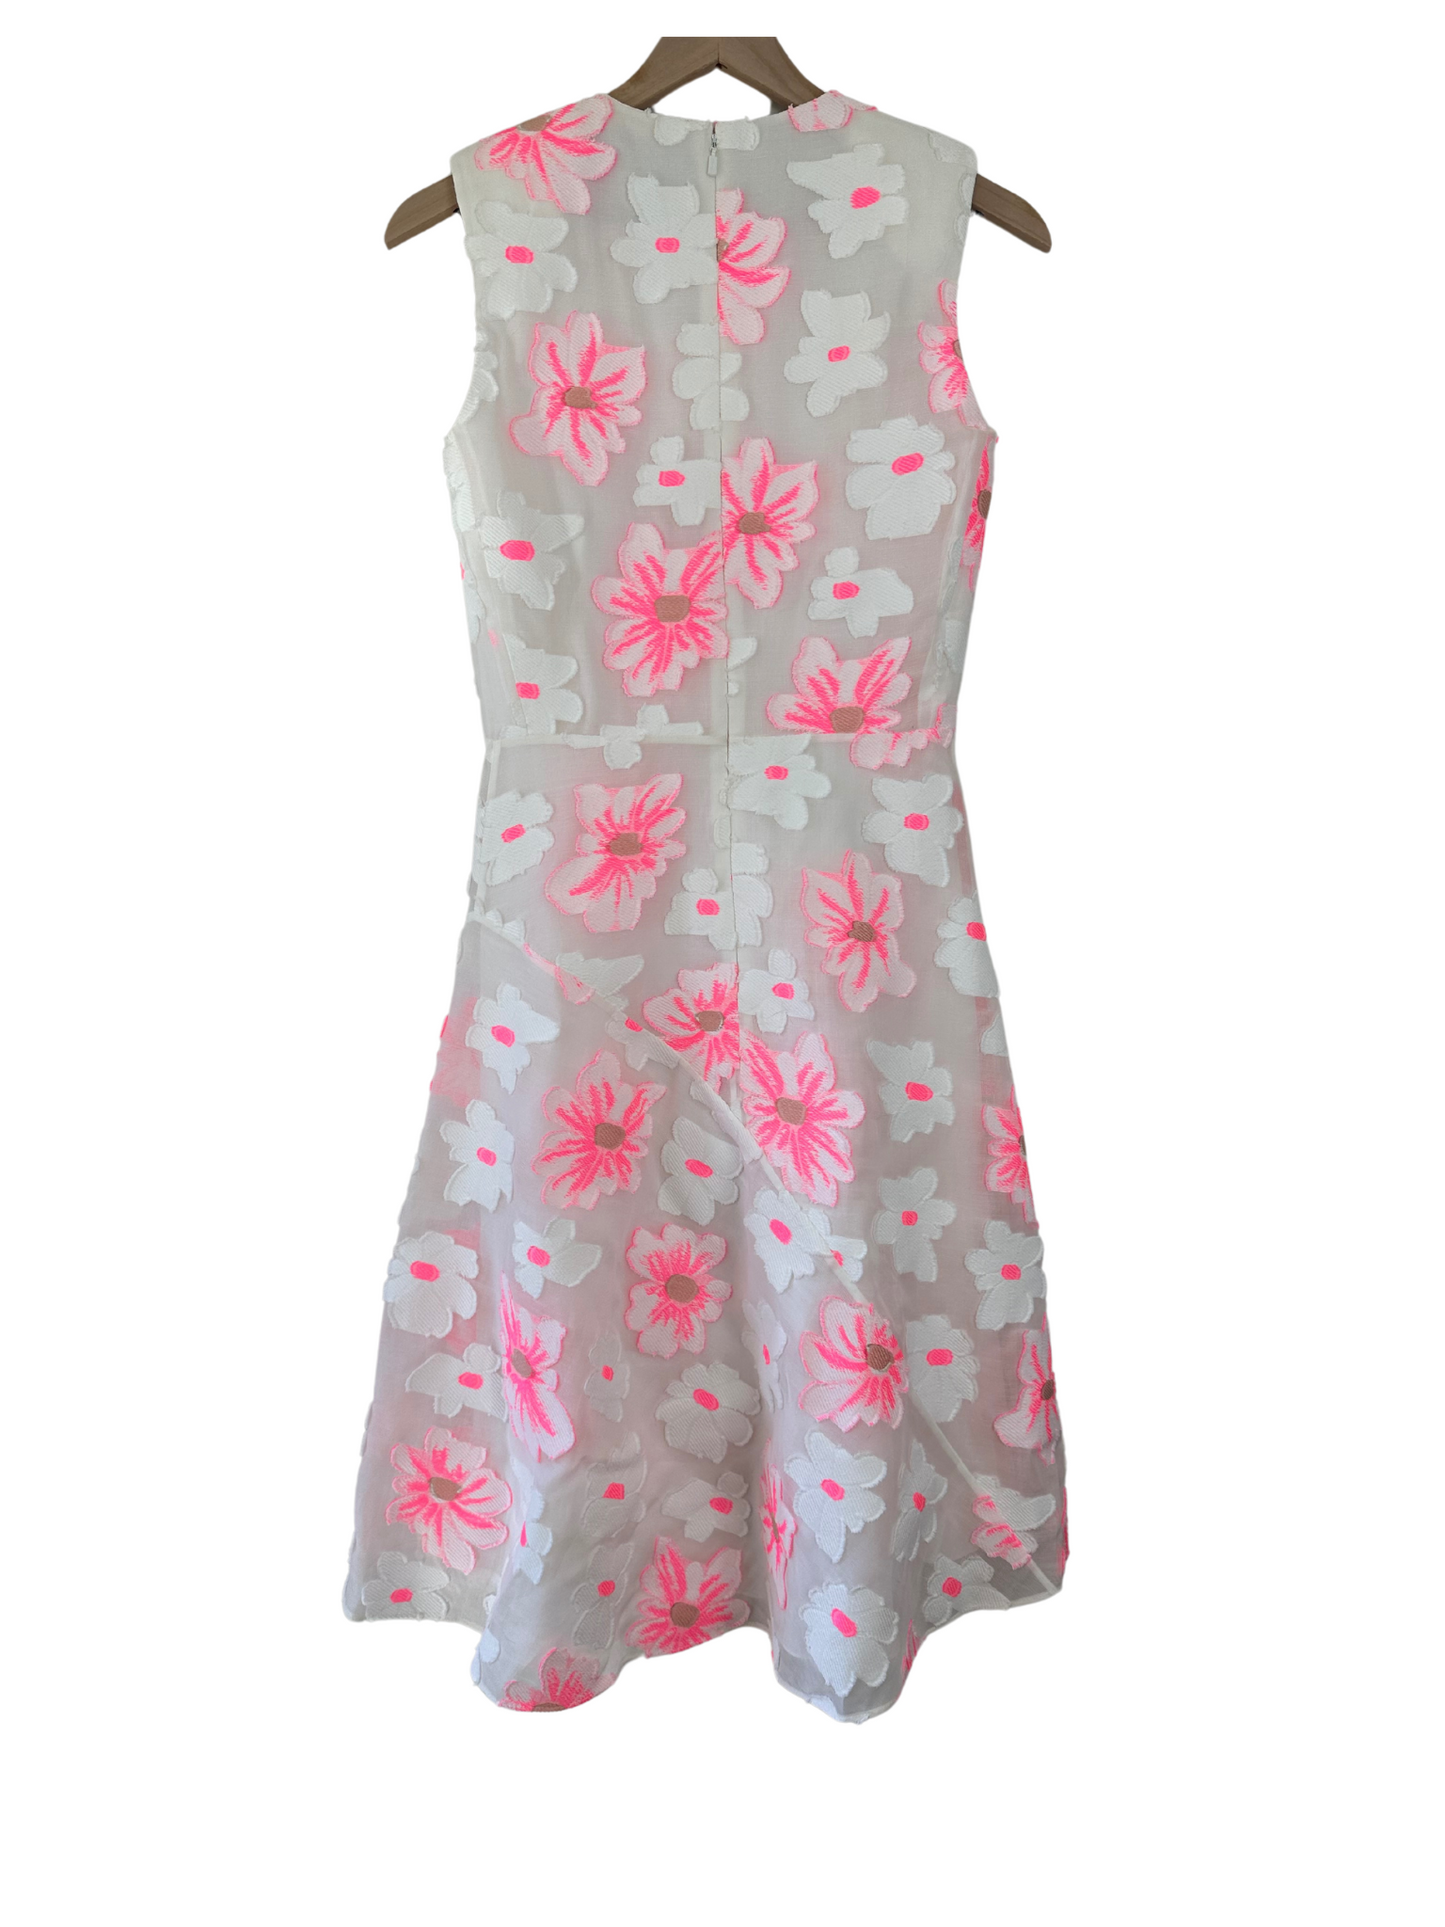 Chloé White and Florescent Pink Floral Embroidered Organza High Low Dress Size 34